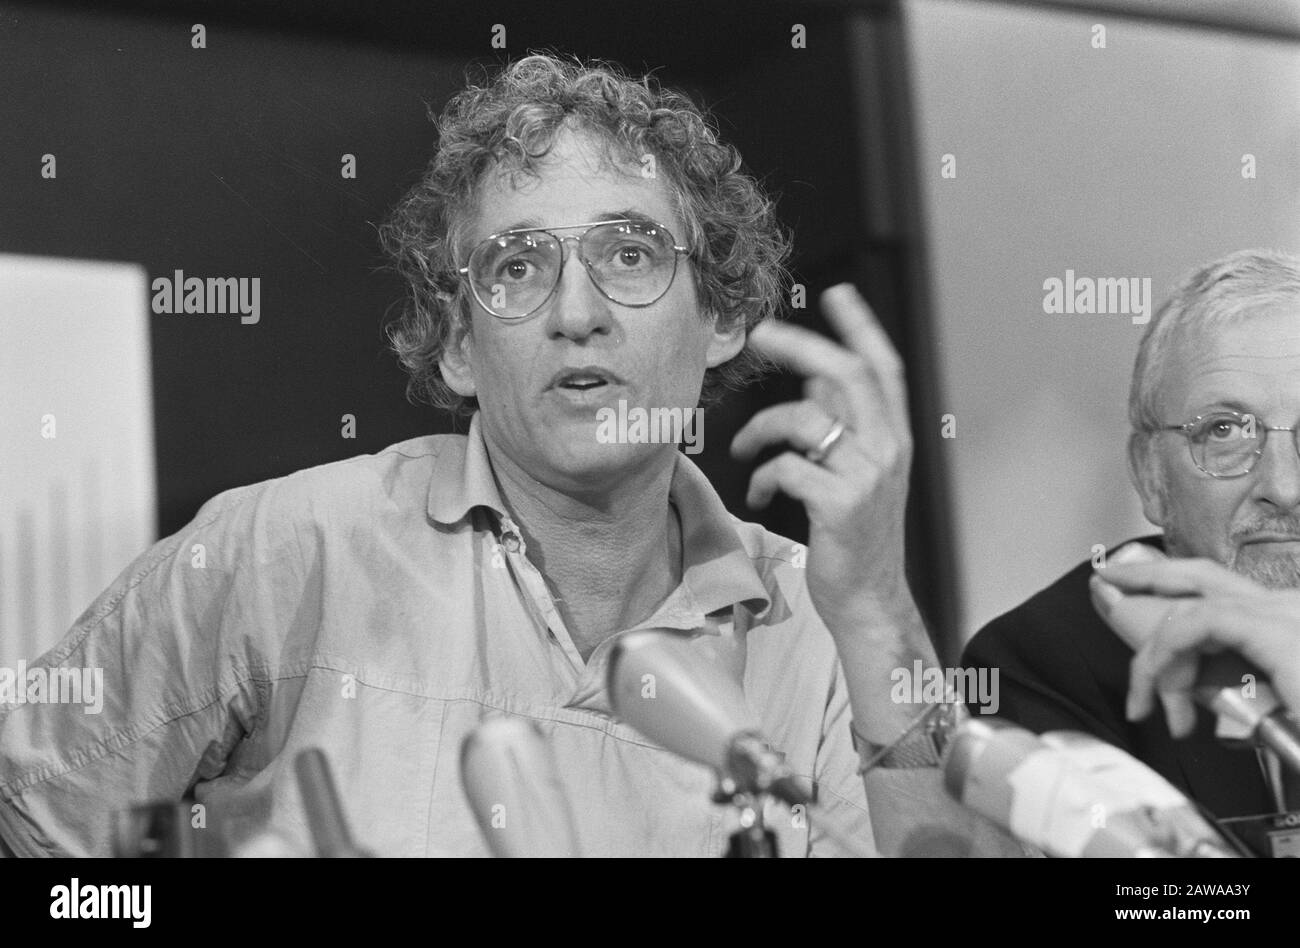 Klaas de Jonge after two years of South African prison back at Schiphol; Klaas de Jonge state press to answer Date: September 8, 1987 Keywords: imprisonments, releases Person Name: Klaas Young Institution Name: Schiphol Stock Photo